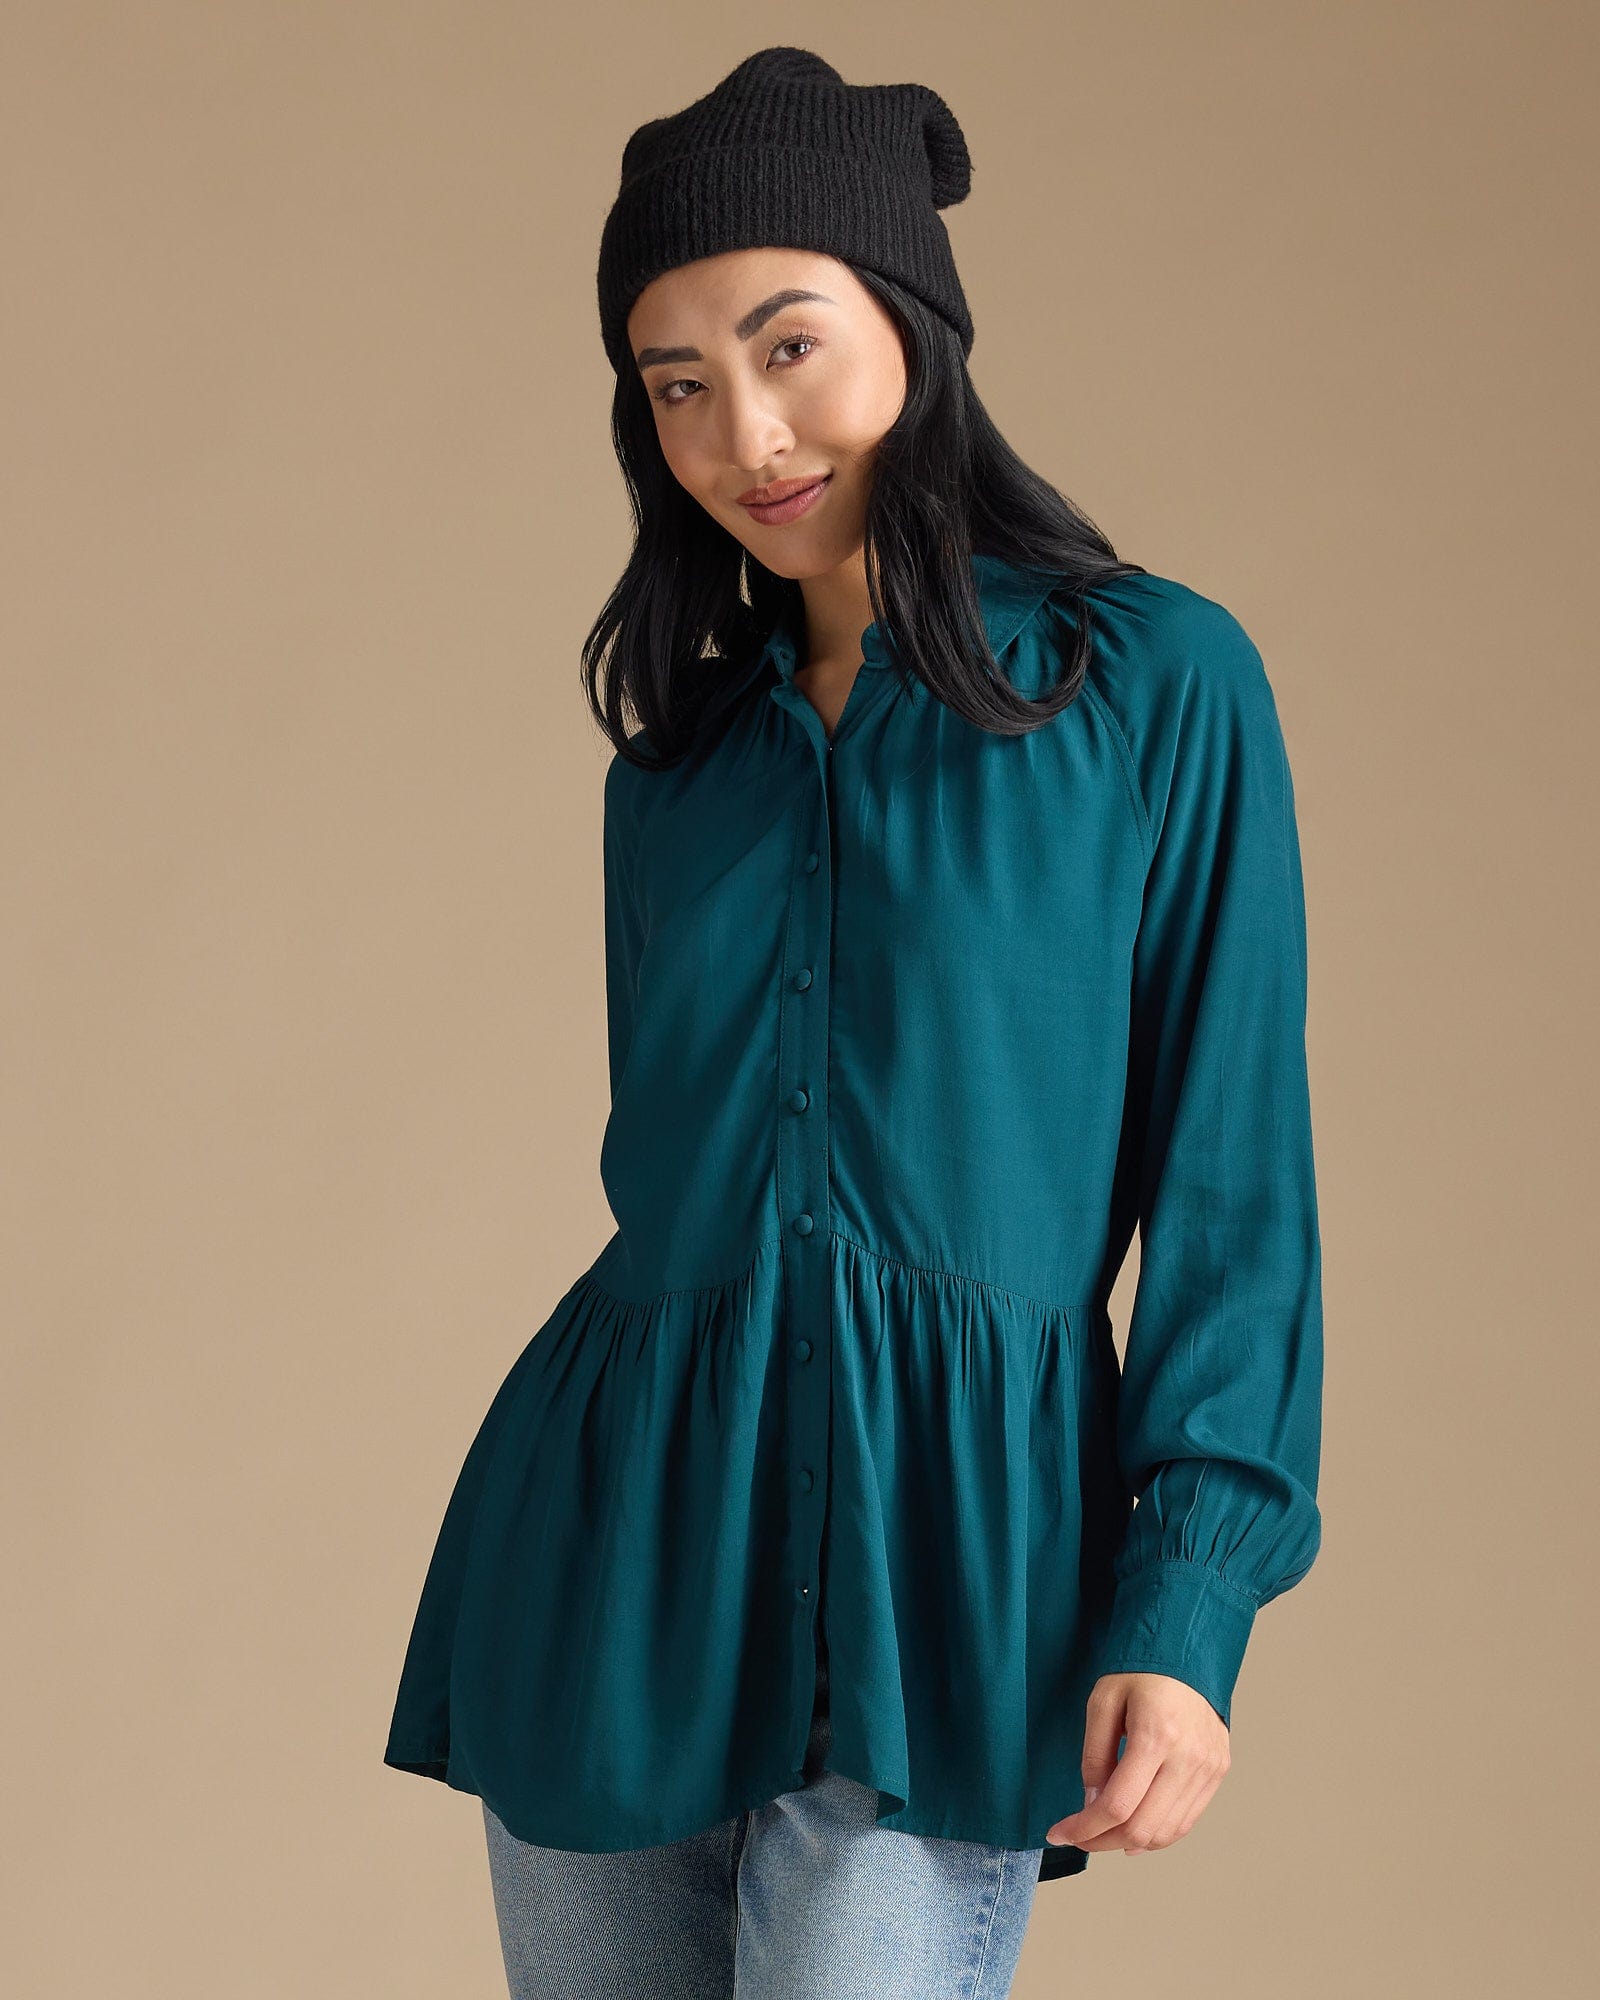 Woman in a teal button-down peplum top